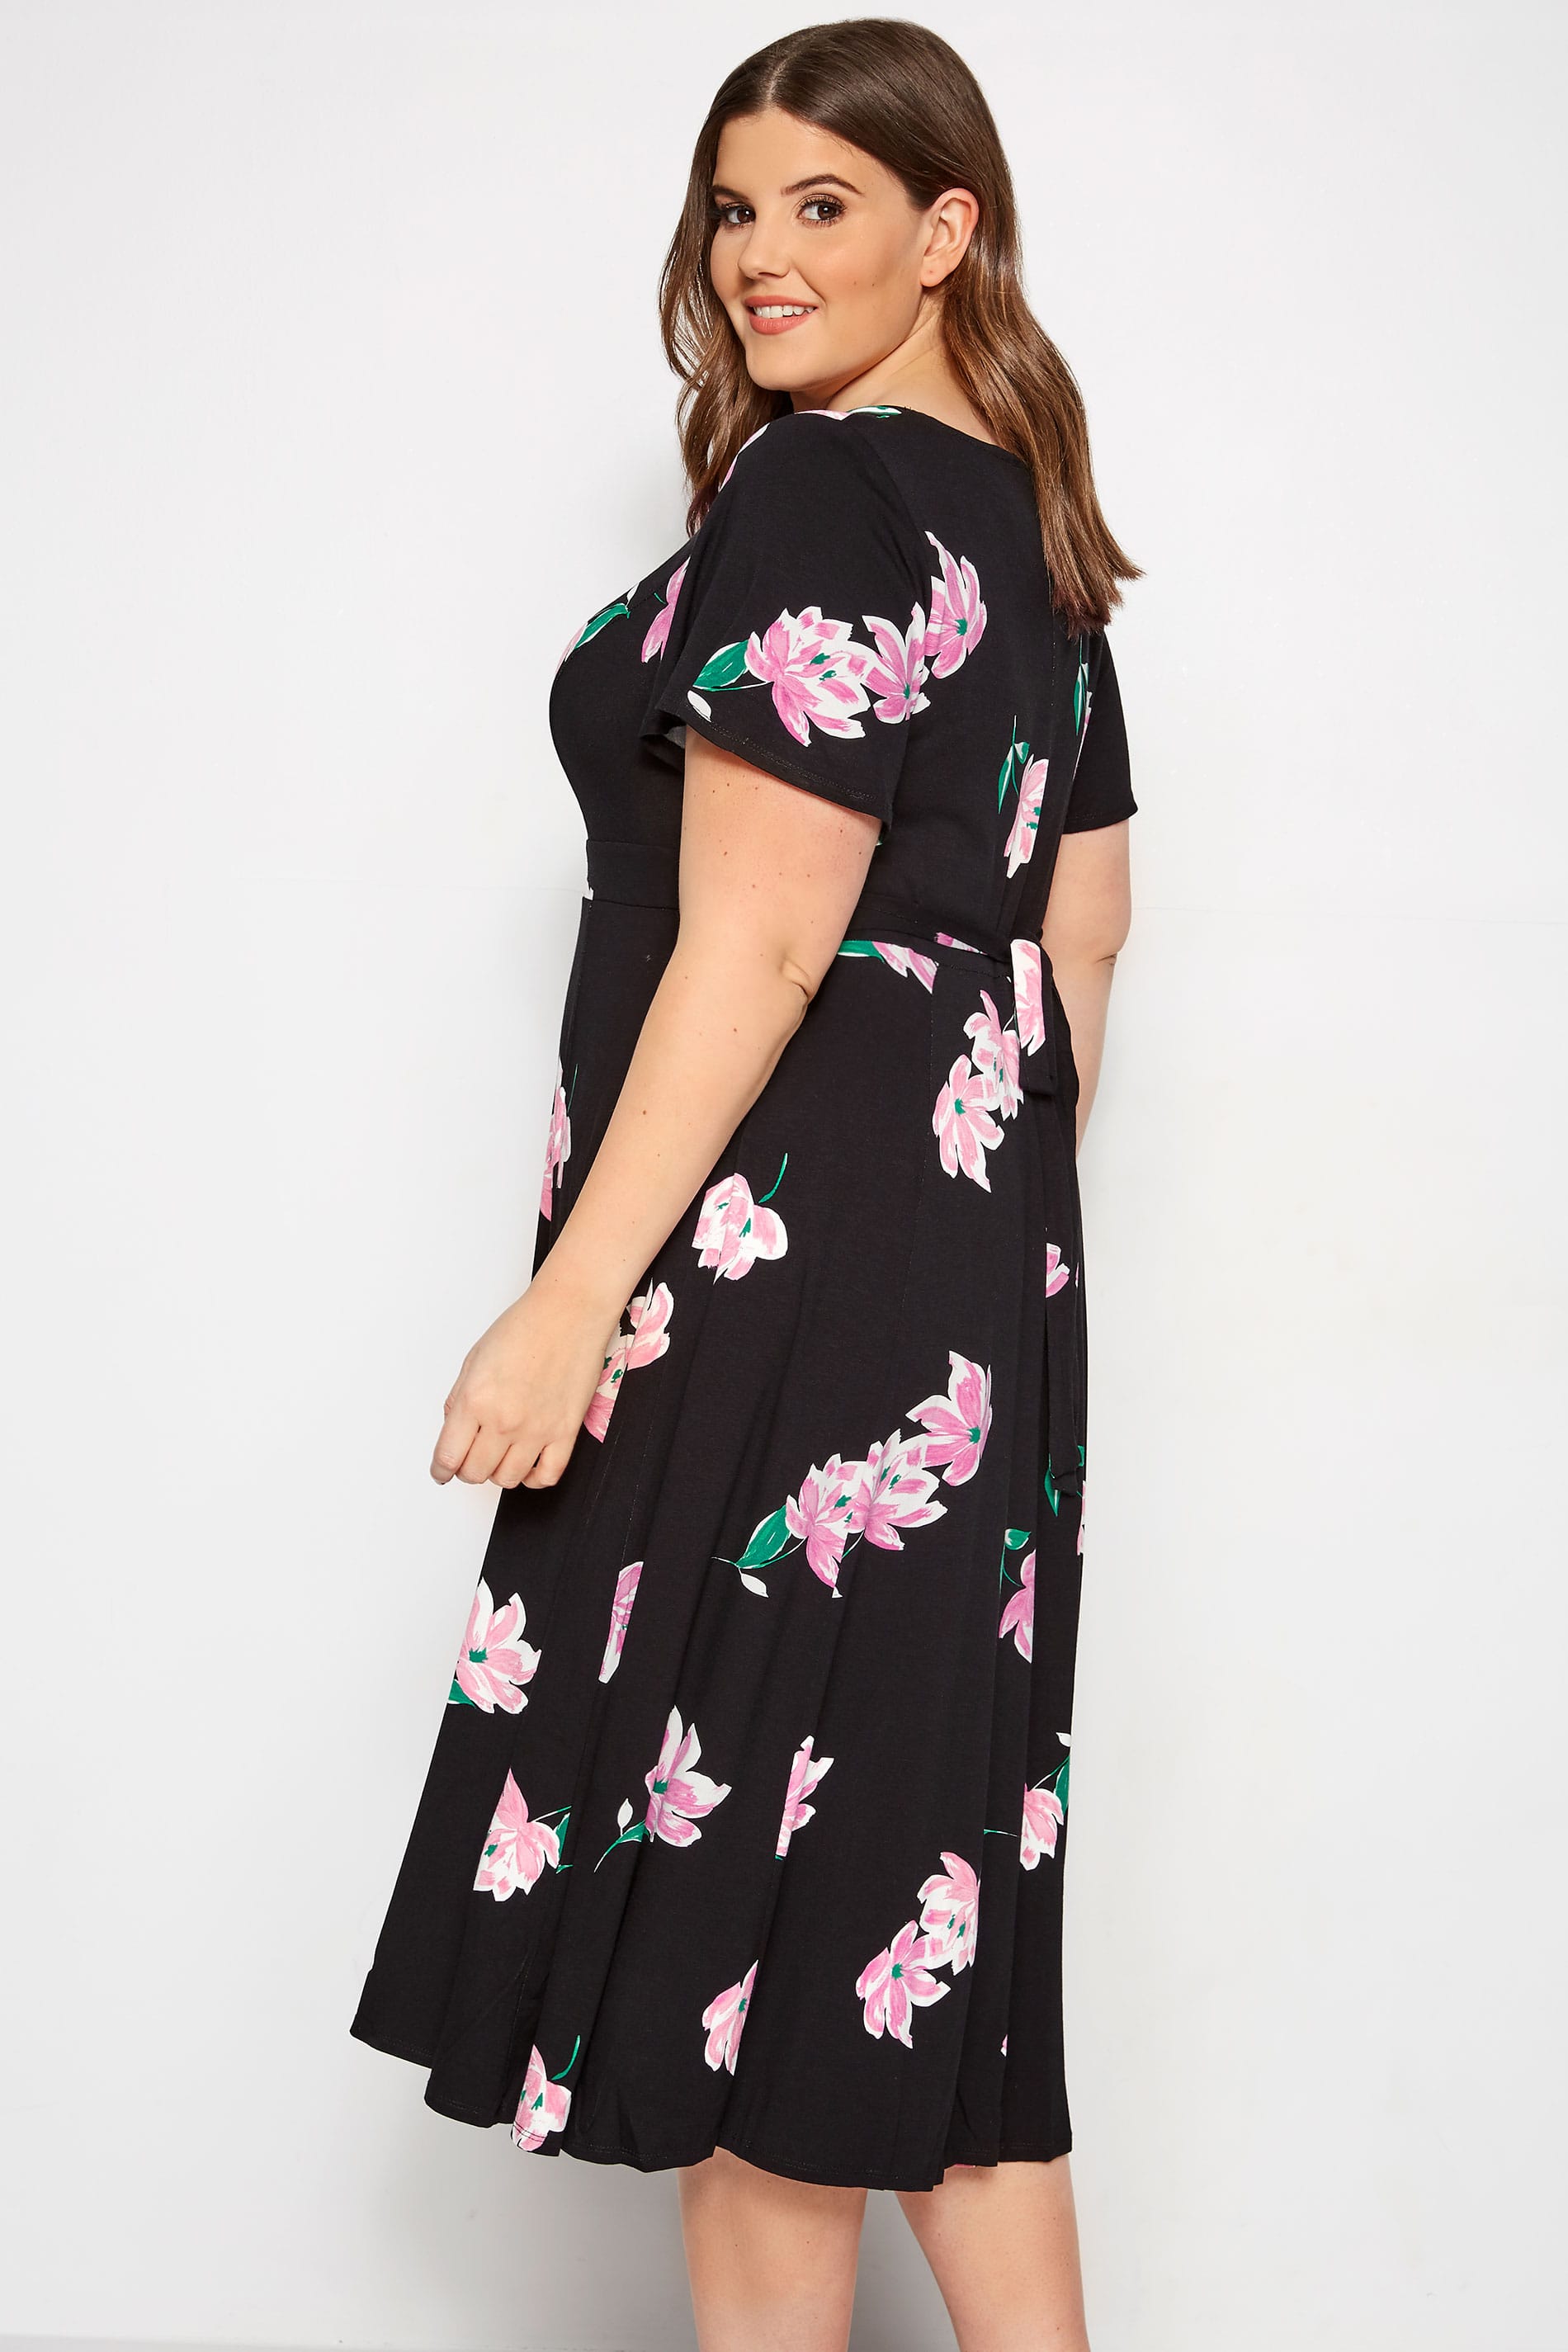 Plus Size Black & Pink Floral Midi Dress | Sizes 16 to 36 | Yours Clothing